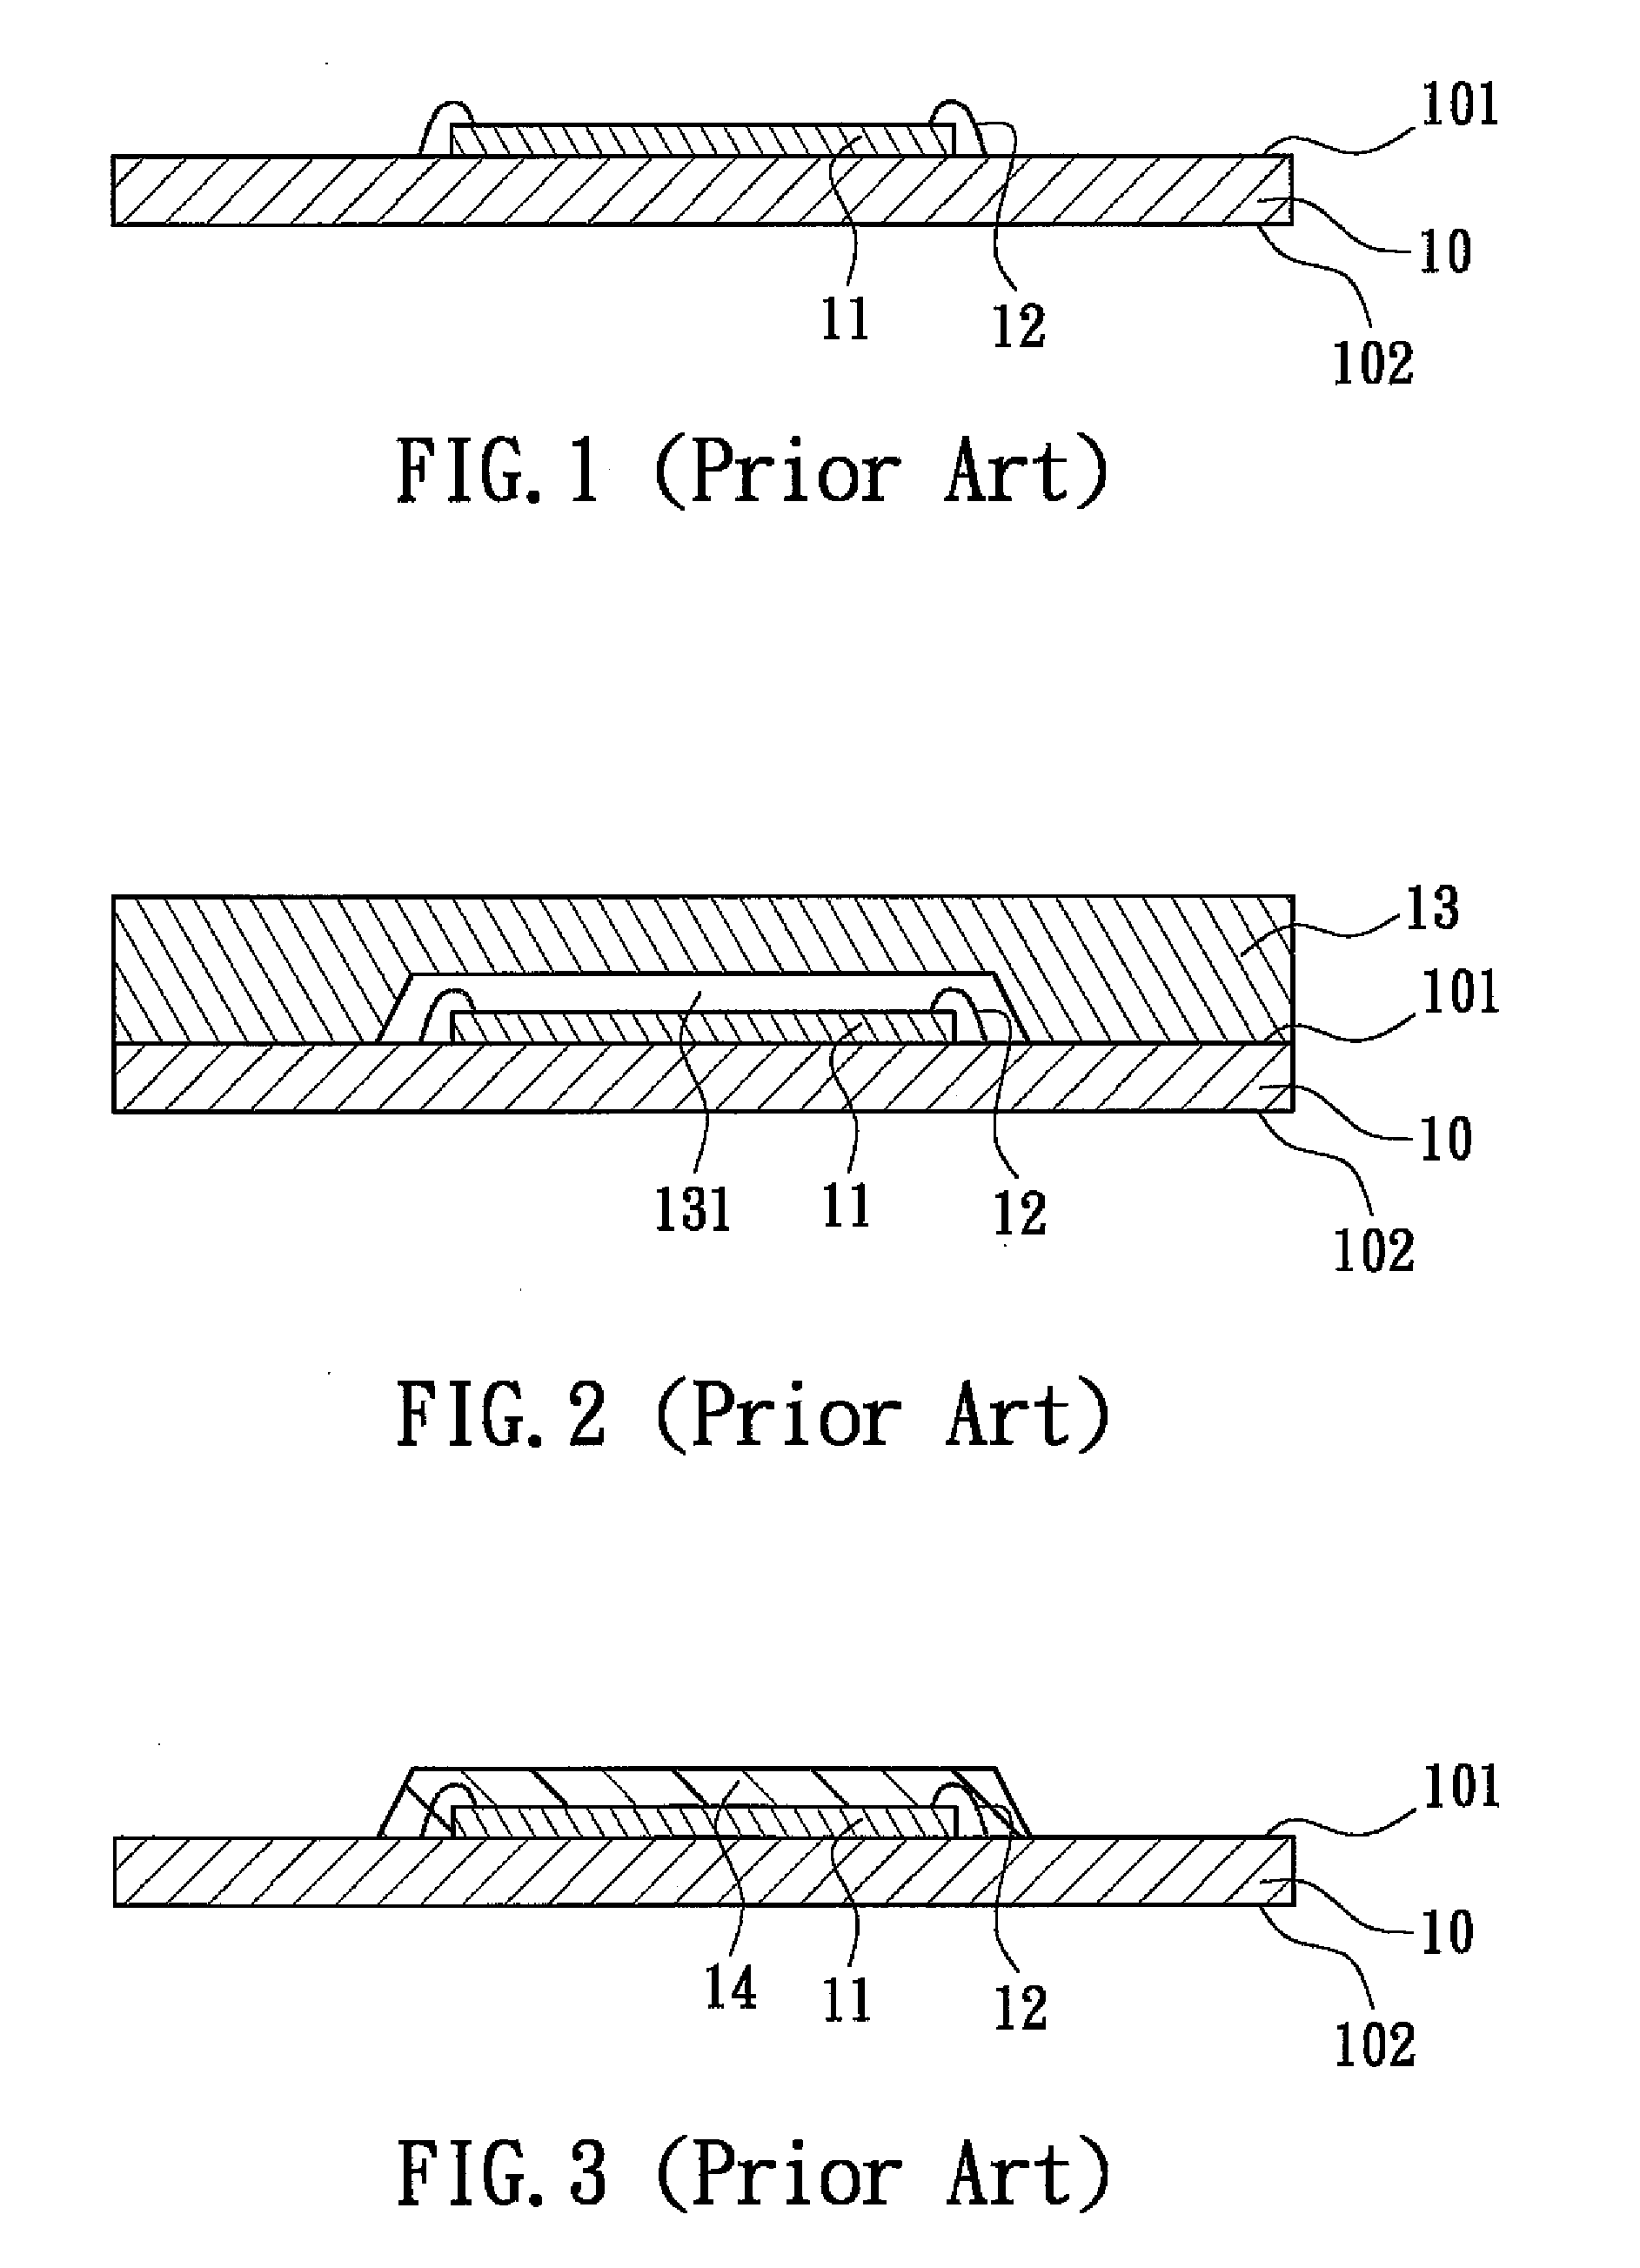 Semiconductor package and the method of making the same